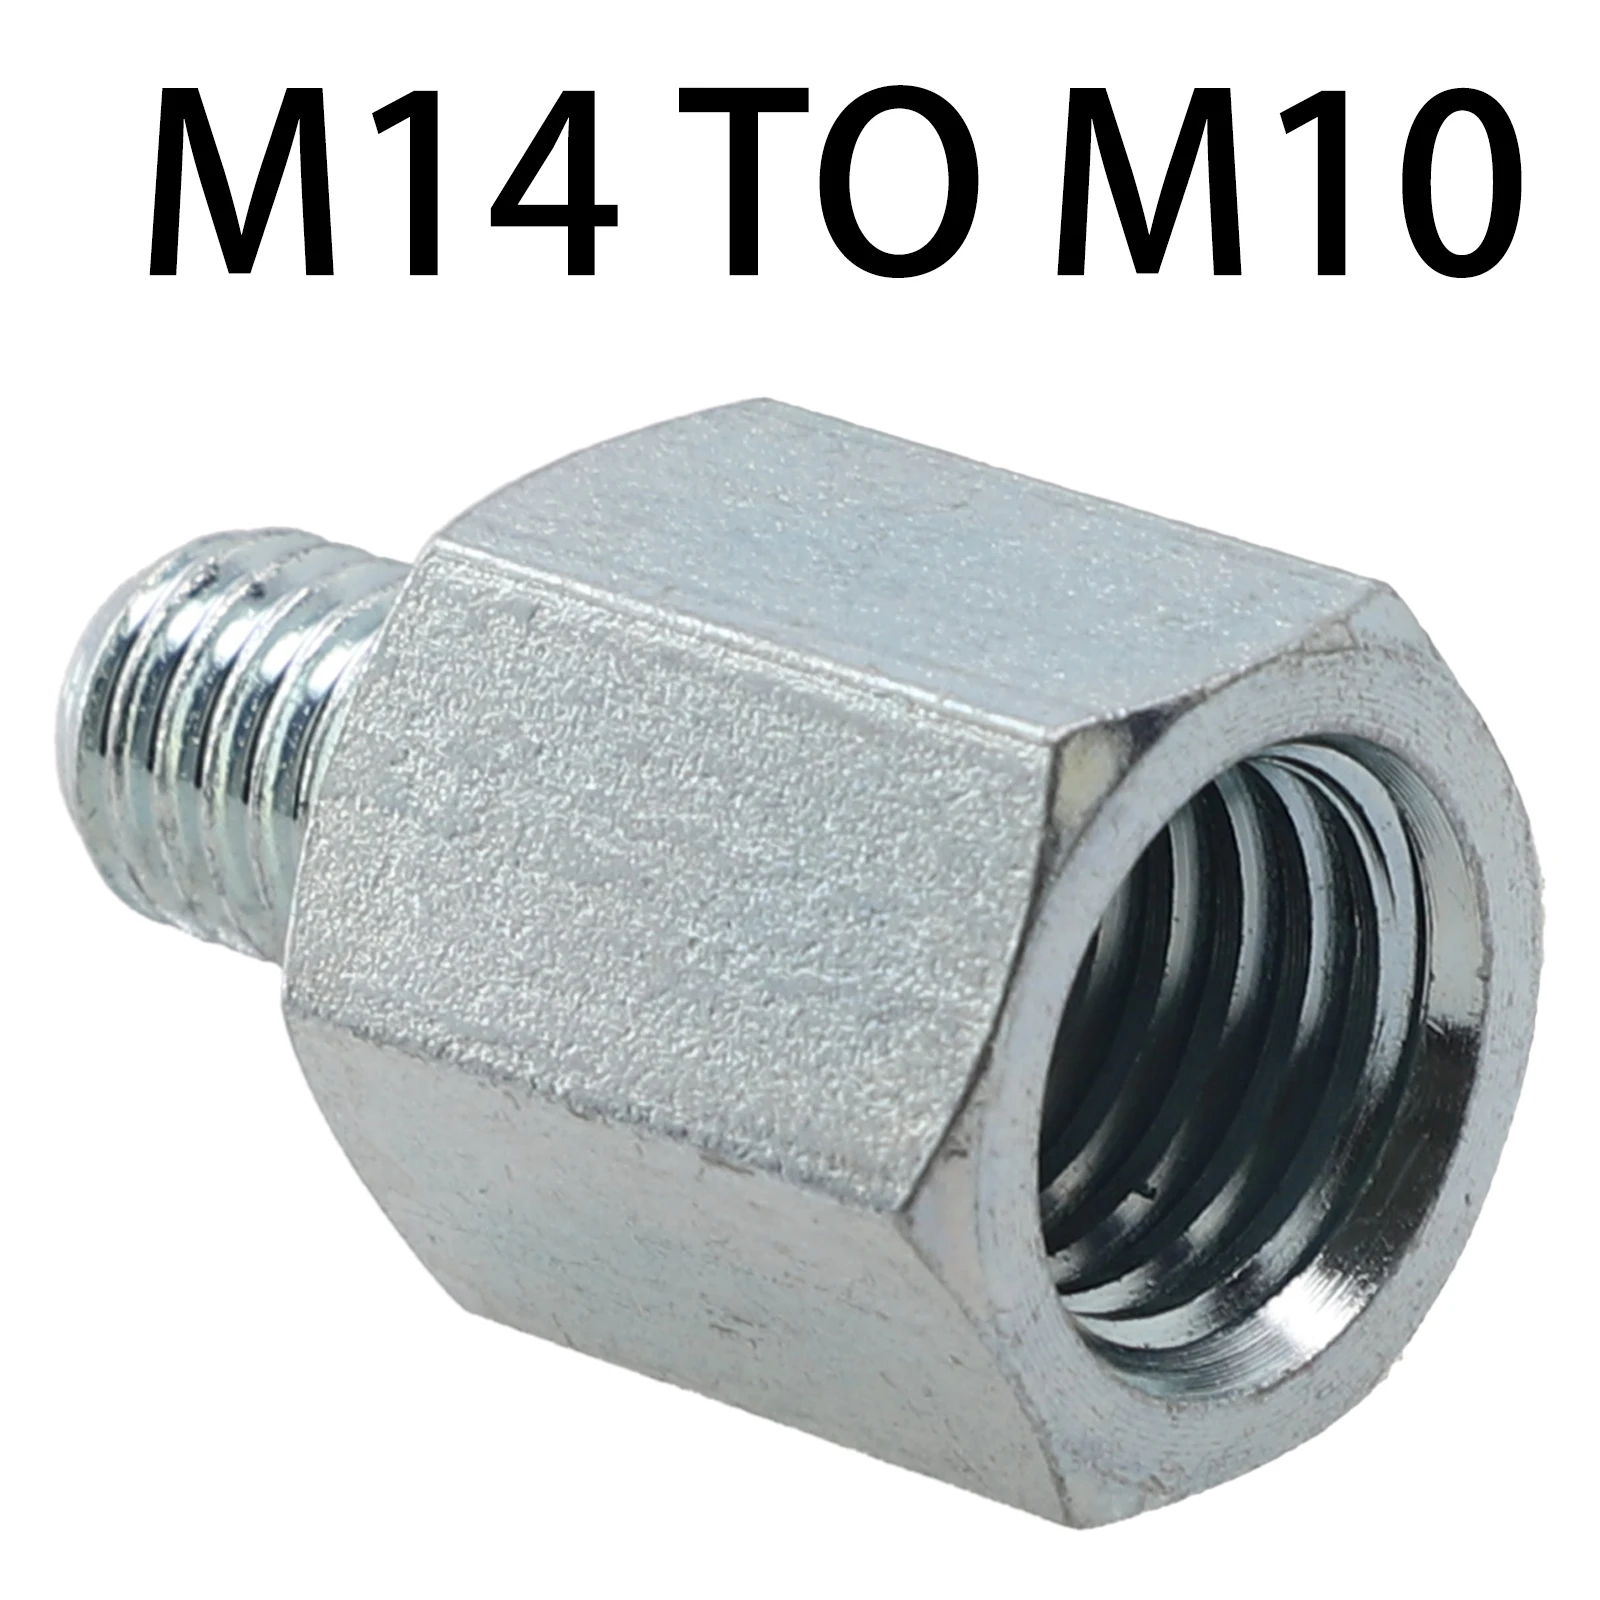 цена Angle Grinder Thread Adapter Connector Converter For Angle Grinder M10 To M14 M14 To M10 M14 To 5/8 -11 5/8 -11to M14 M16 To M14